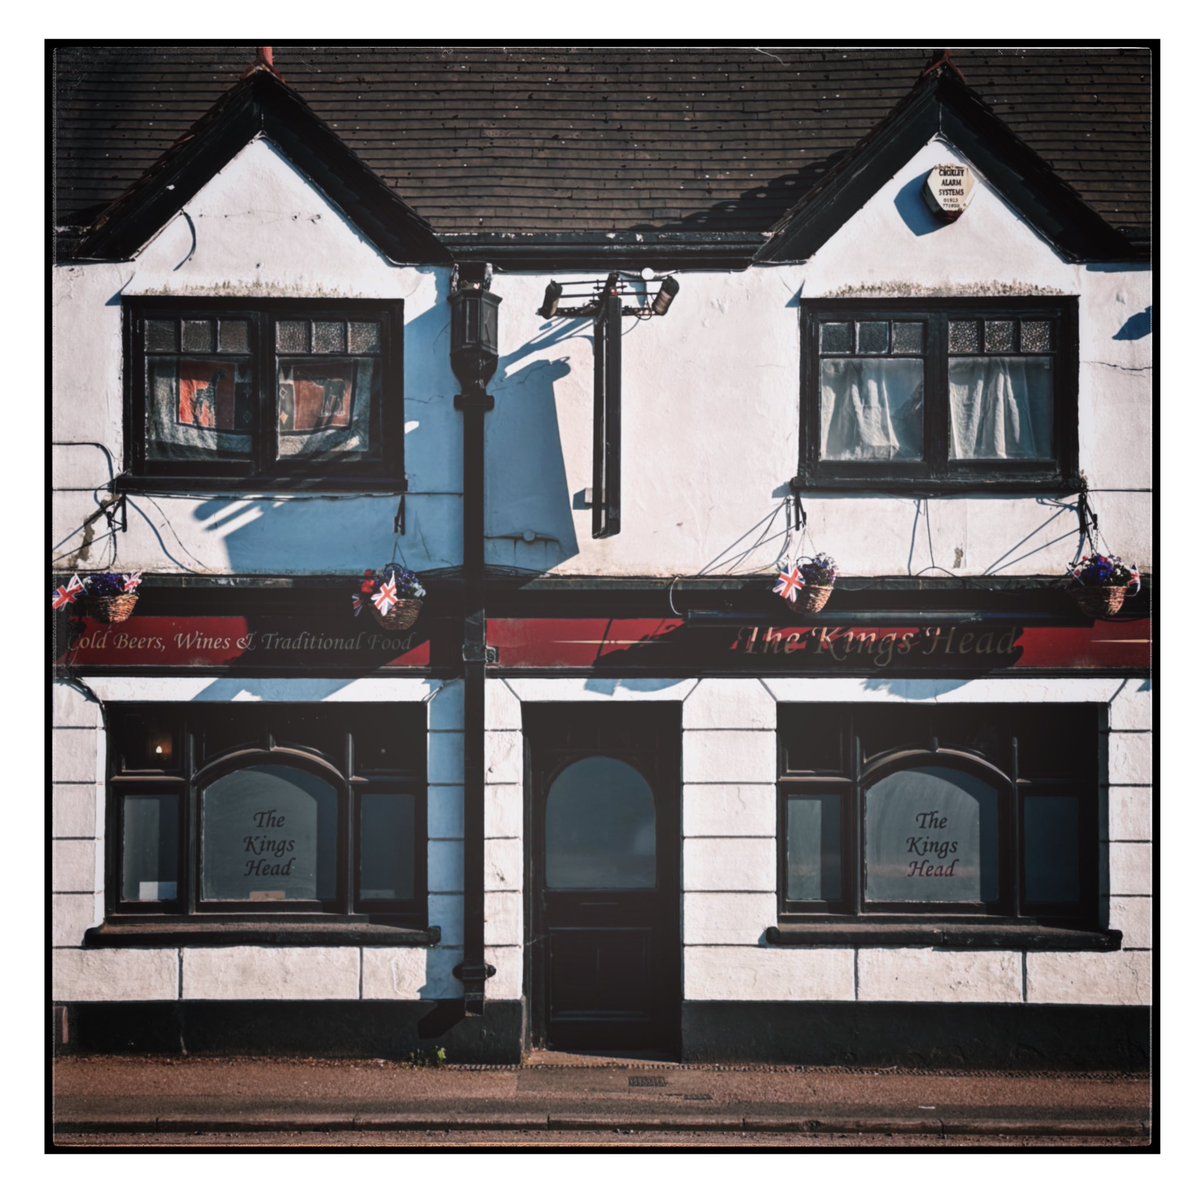 The Kings Head

#hertfordshire #kingslangley #architecture #symmetry #iphone14pro #iphoneography